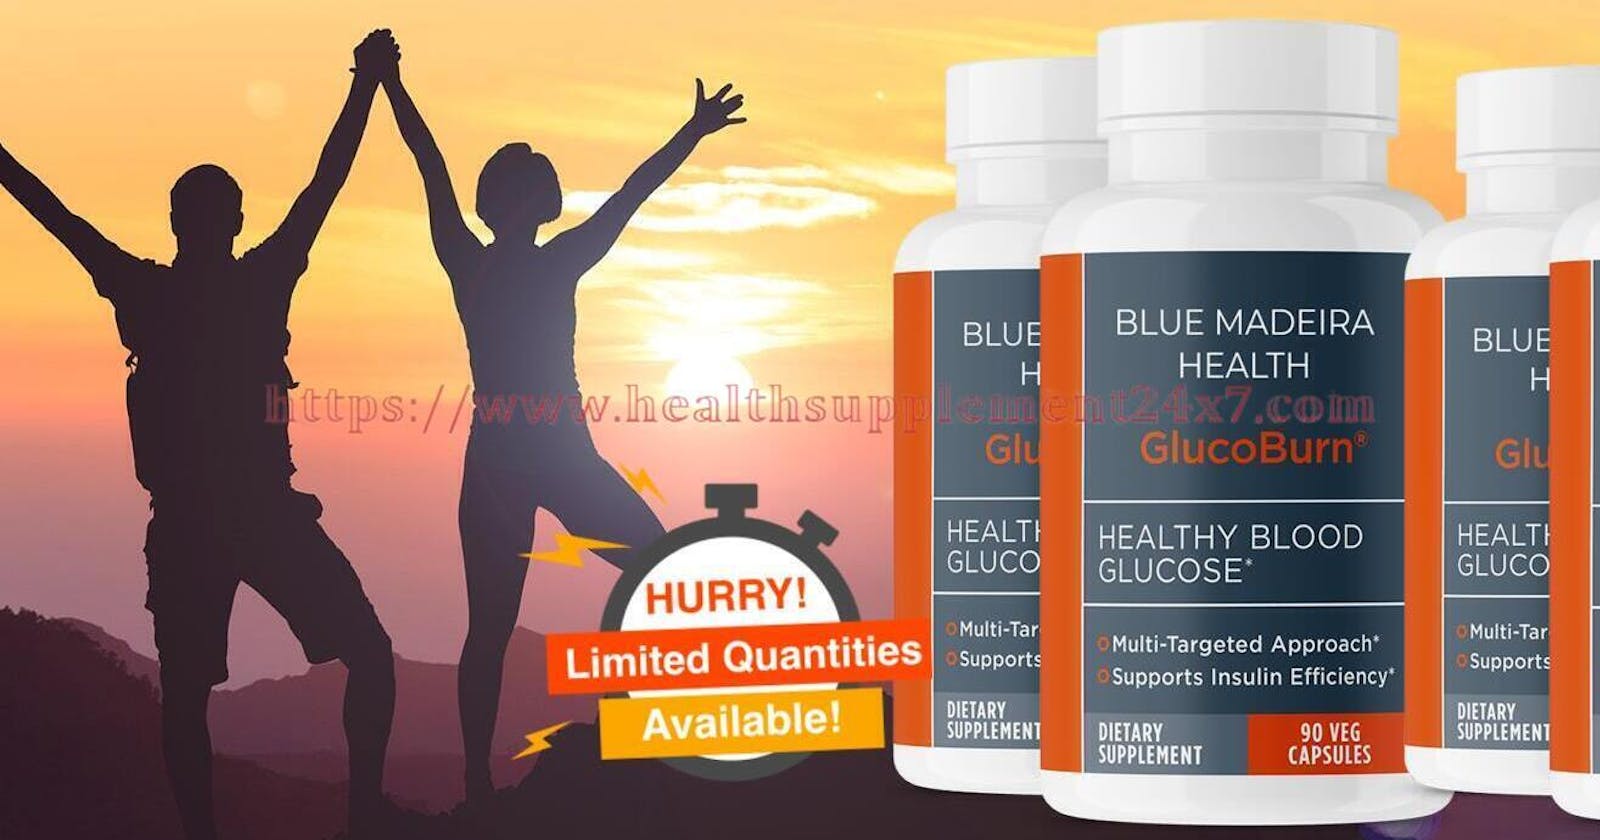 Blue Madeira Health GlucoBurn Multi-Targeted Supplement Support Insulin Efficiency Supports Weight Loss(Real Or Hoax)